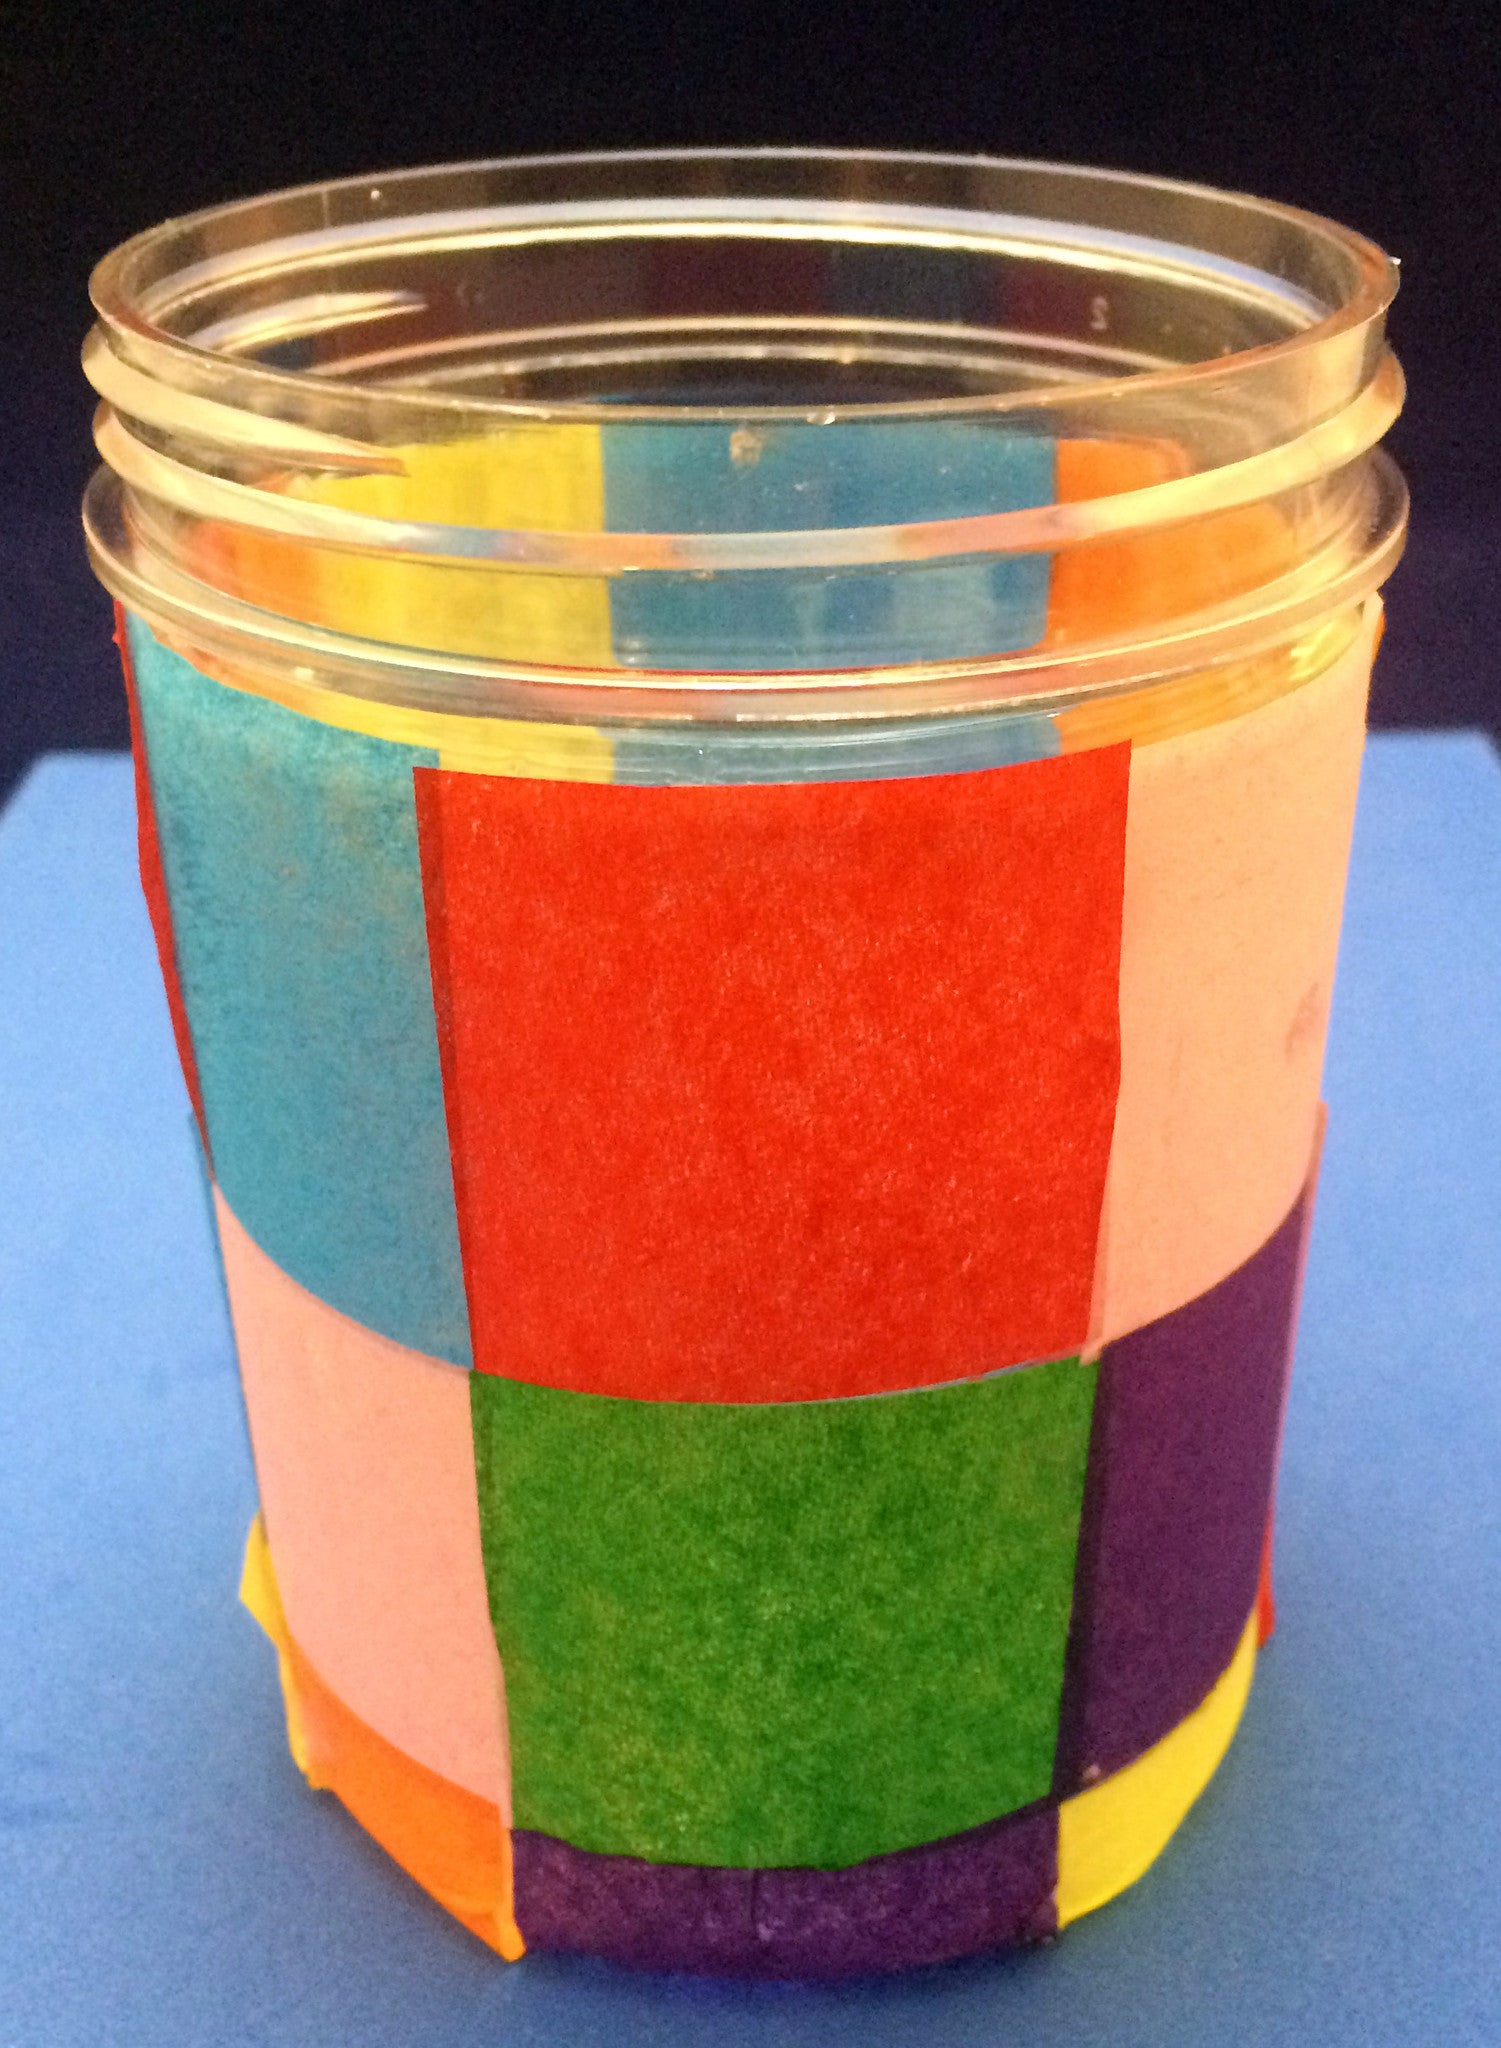 Create your own Lantern Art Project Inspired by The Very Lonely Firefly by Eric Carle